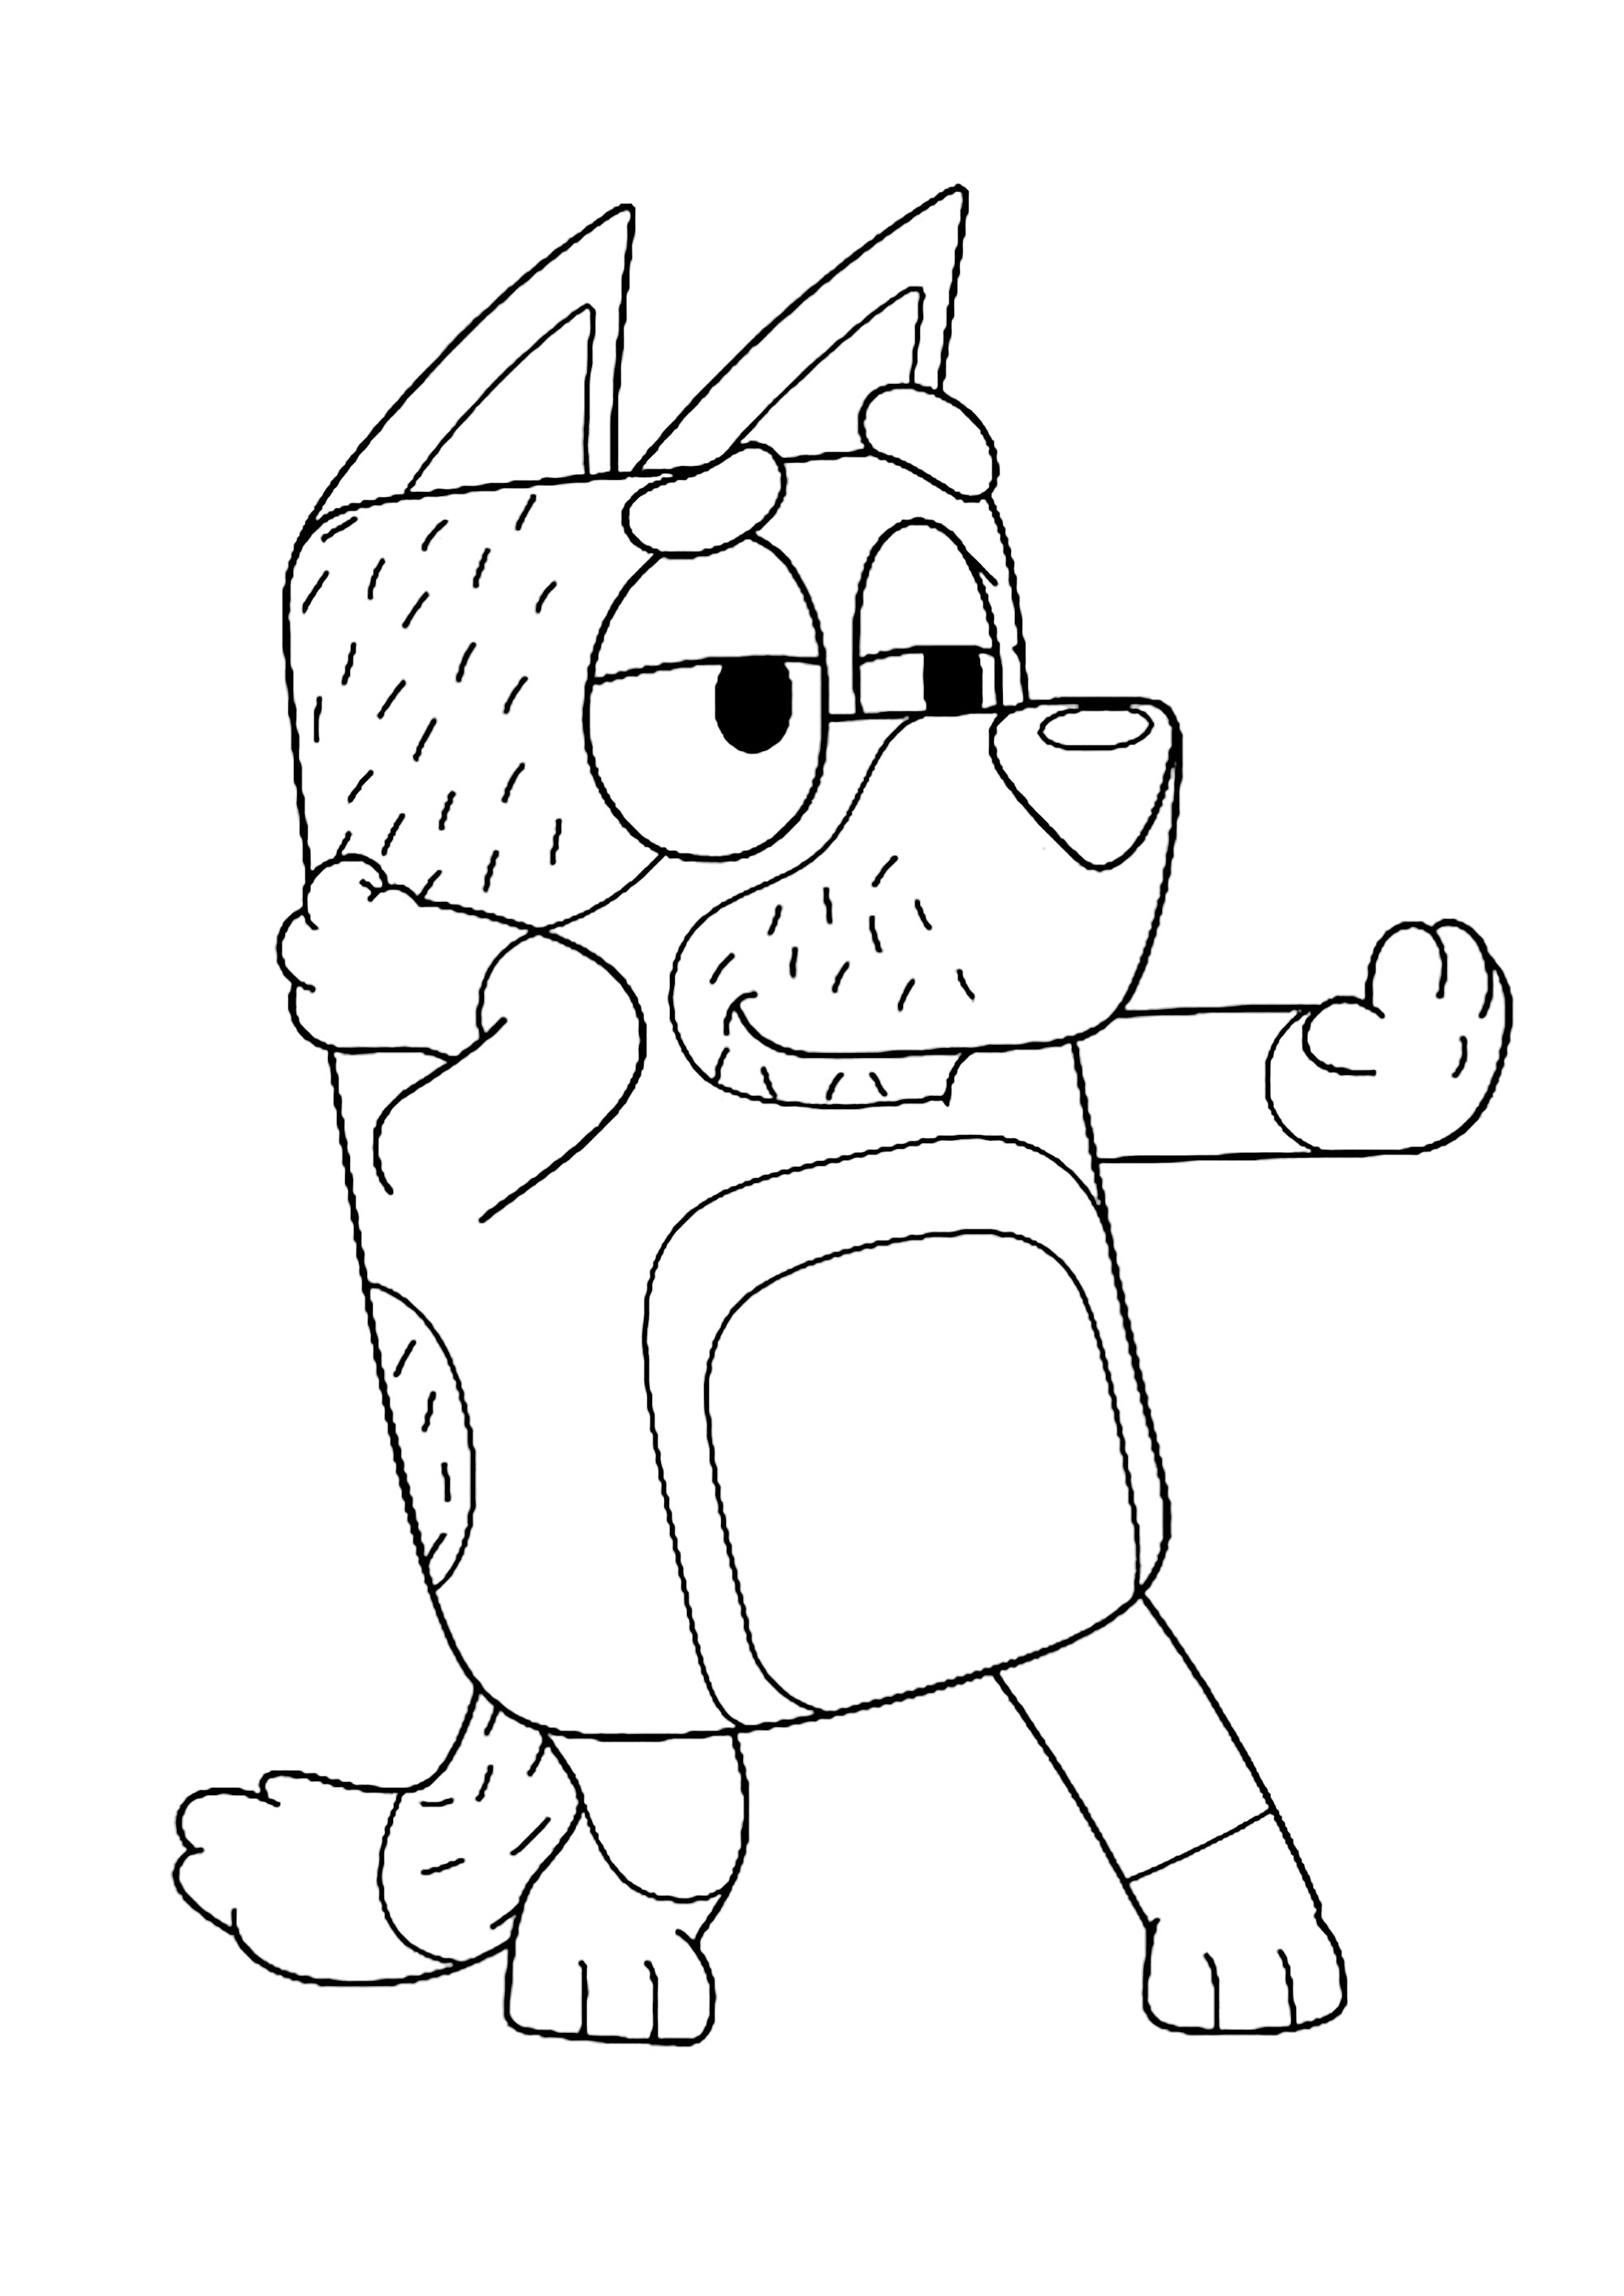 Simple coloring page of Bluey: Bandit